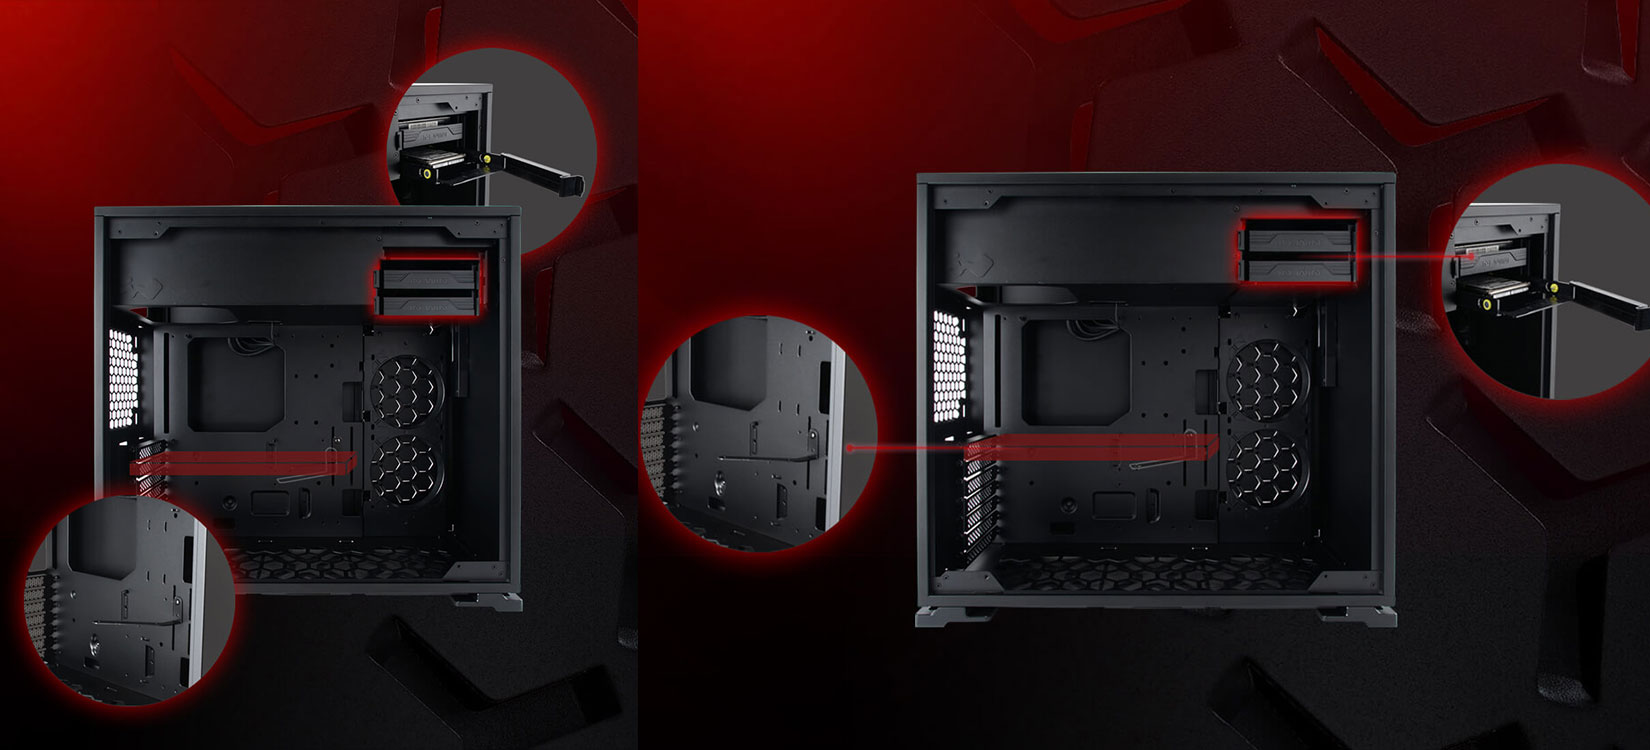 Day-Du-Cong-Ket-Noi-vo-case-inwin-101-black-full-side-tempered-glass-mid-tower-mau-den